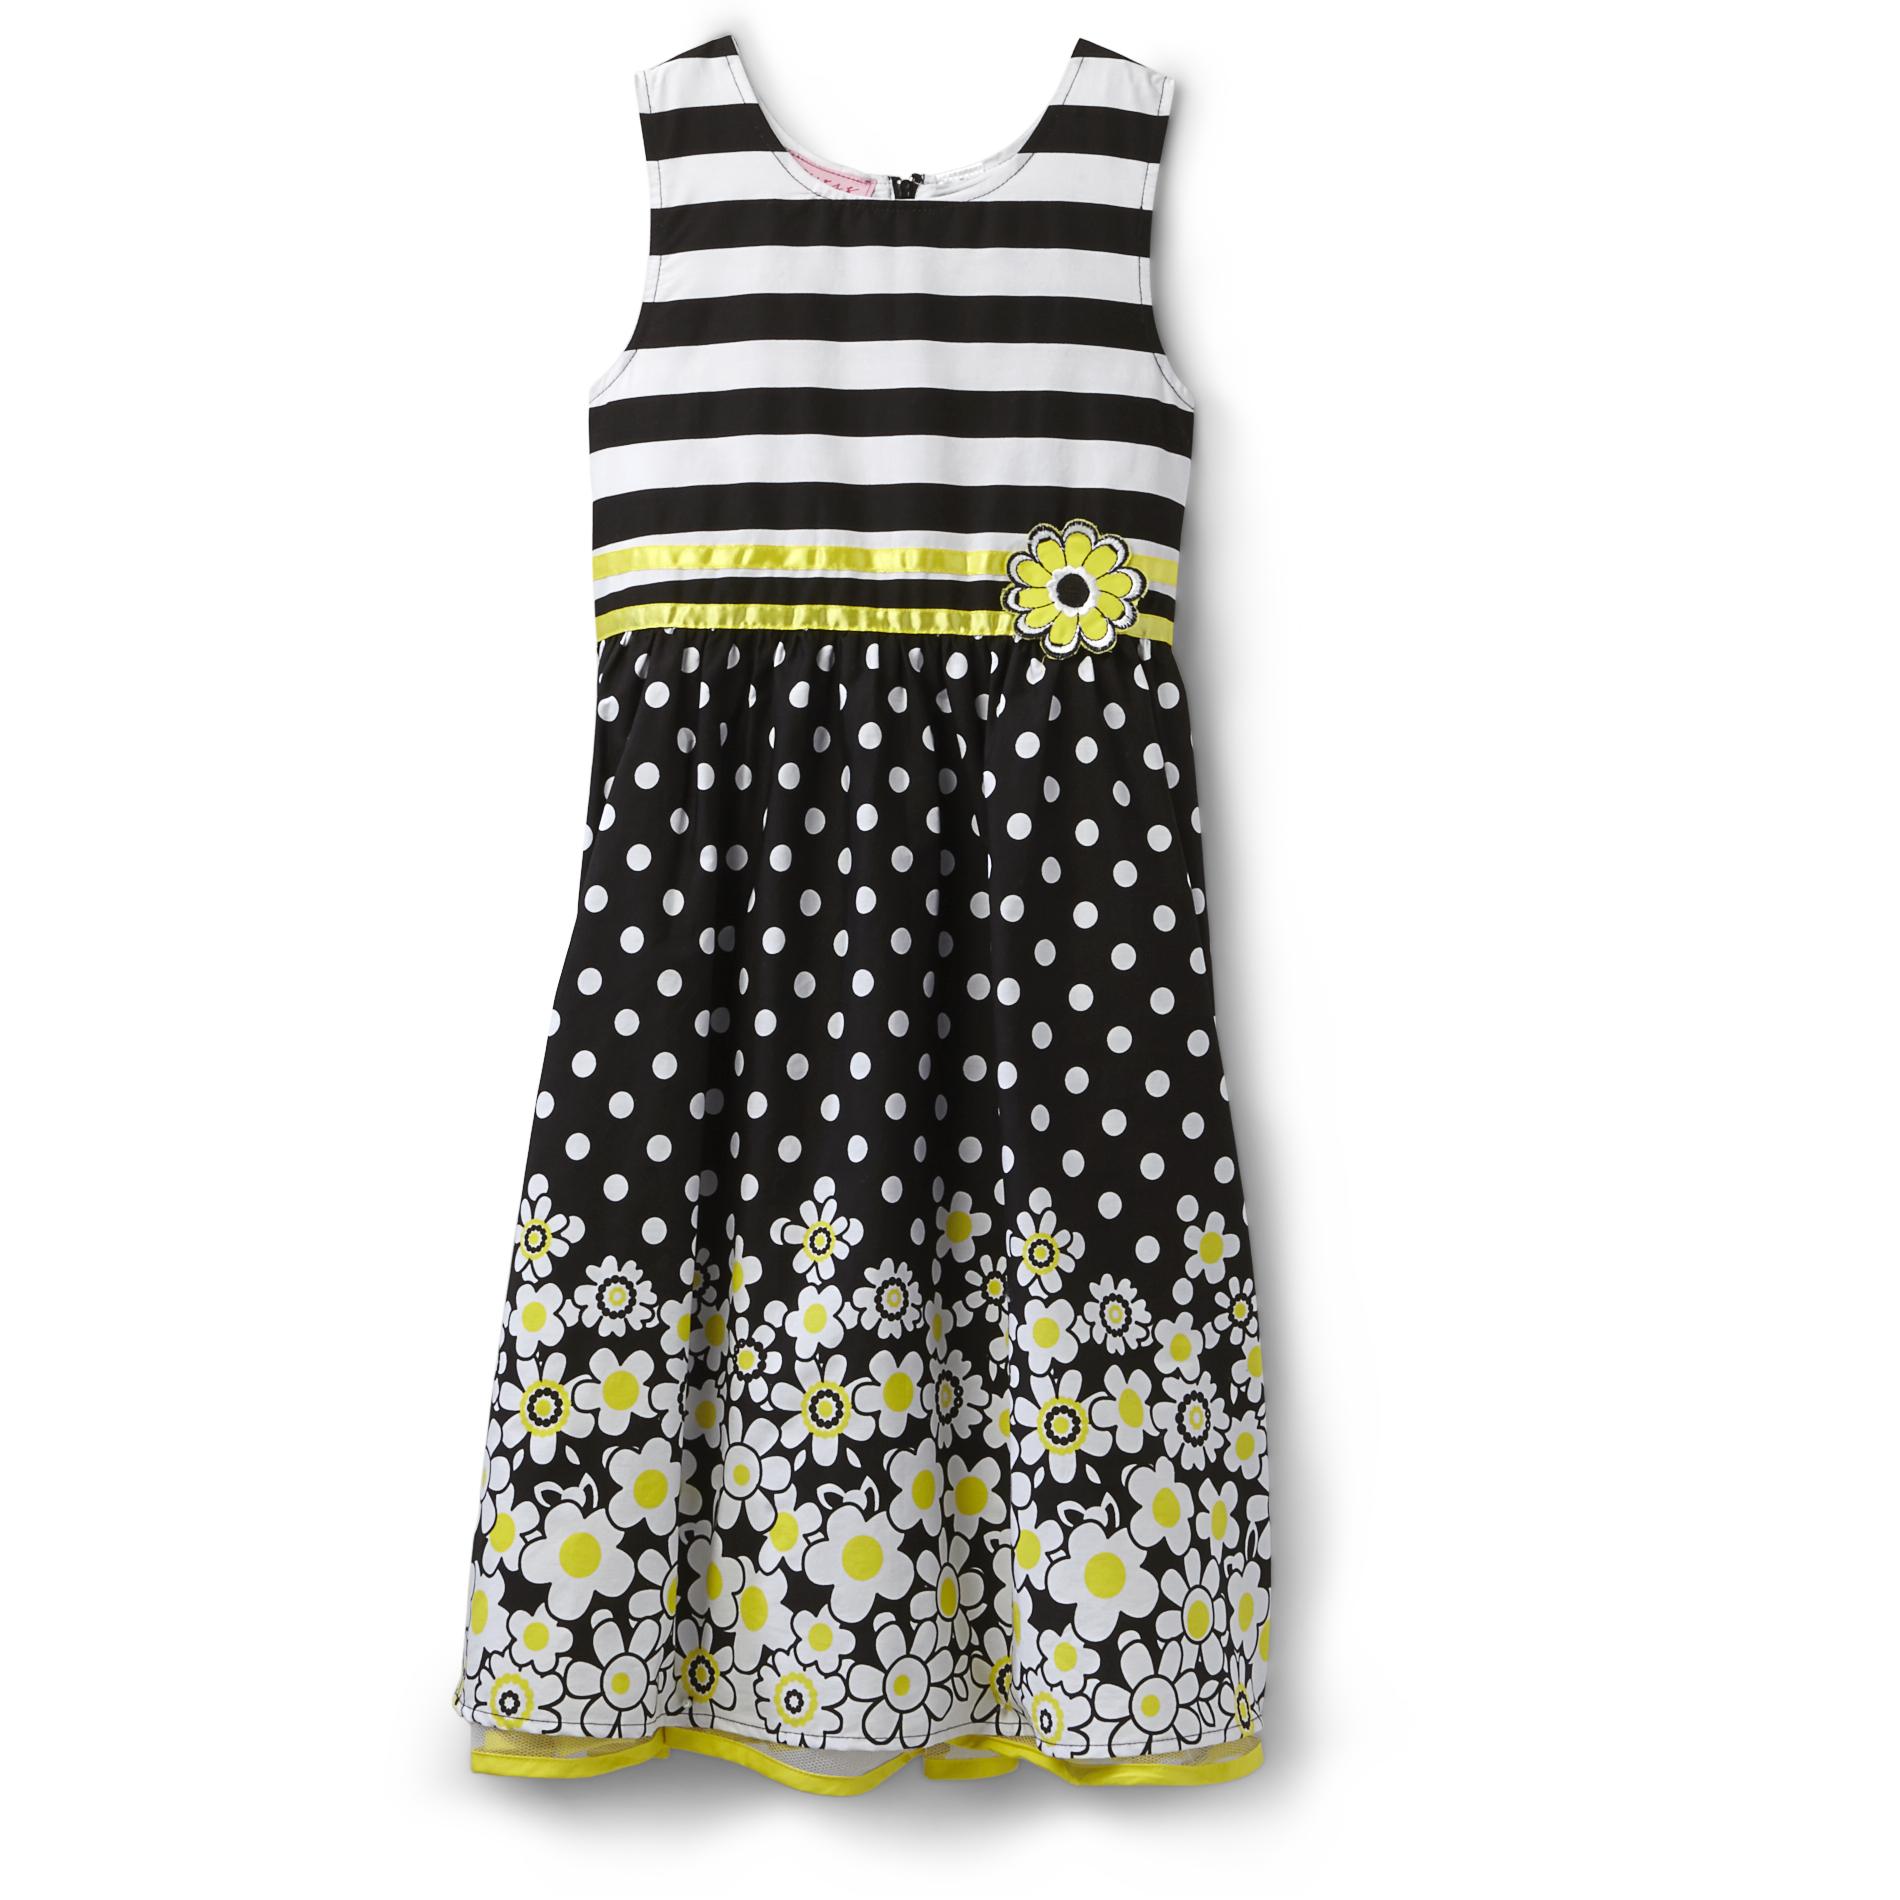 SWAK Girl's Sleeveless Party Dress - Floral Print